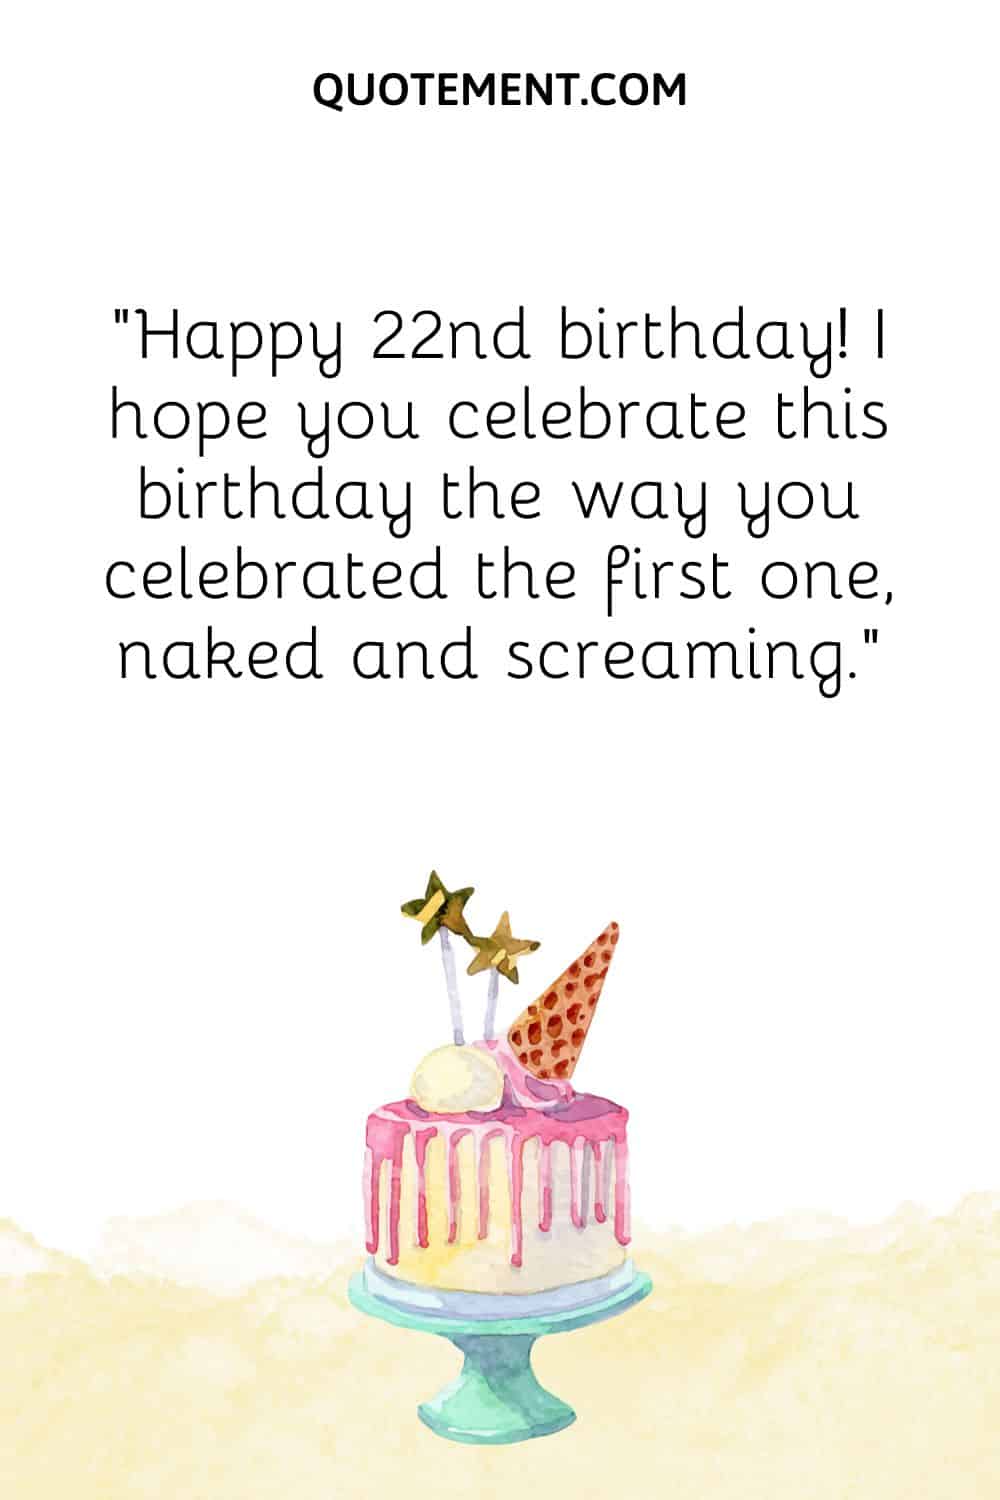 I hope you celebrate this birthday the way you celebrated the first one, naked and screaming